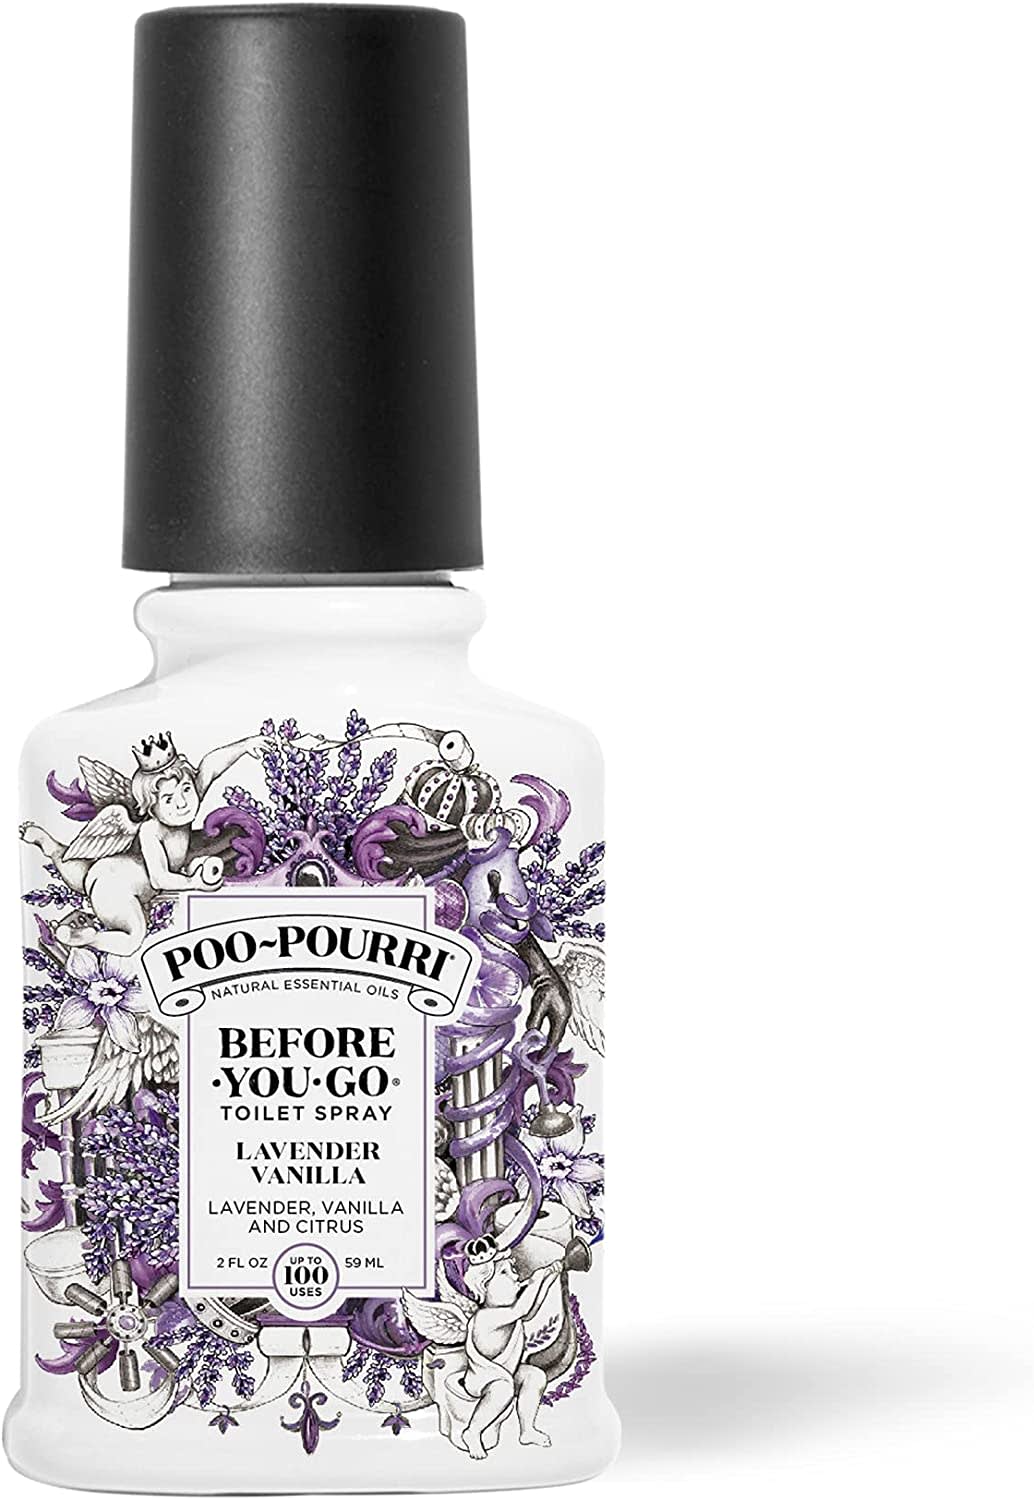 Poo-pourri: how toilet sprays reinvented themselves in recent years